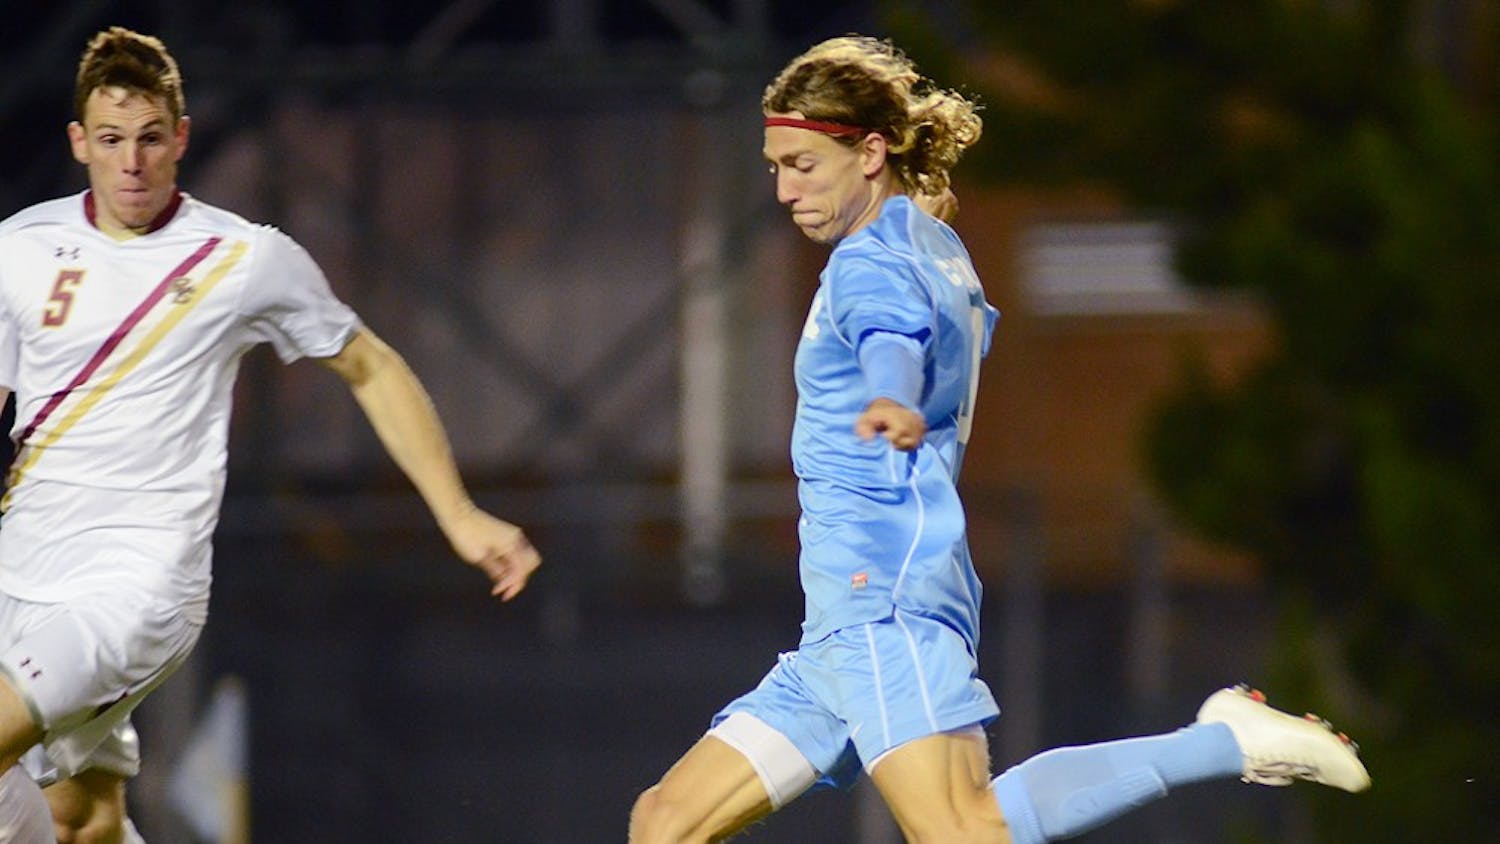 	Junior transfer Andy Craven netted the first goal of the game for the Tar Heels in the 20th minute Thursday night at Fetzer Field.